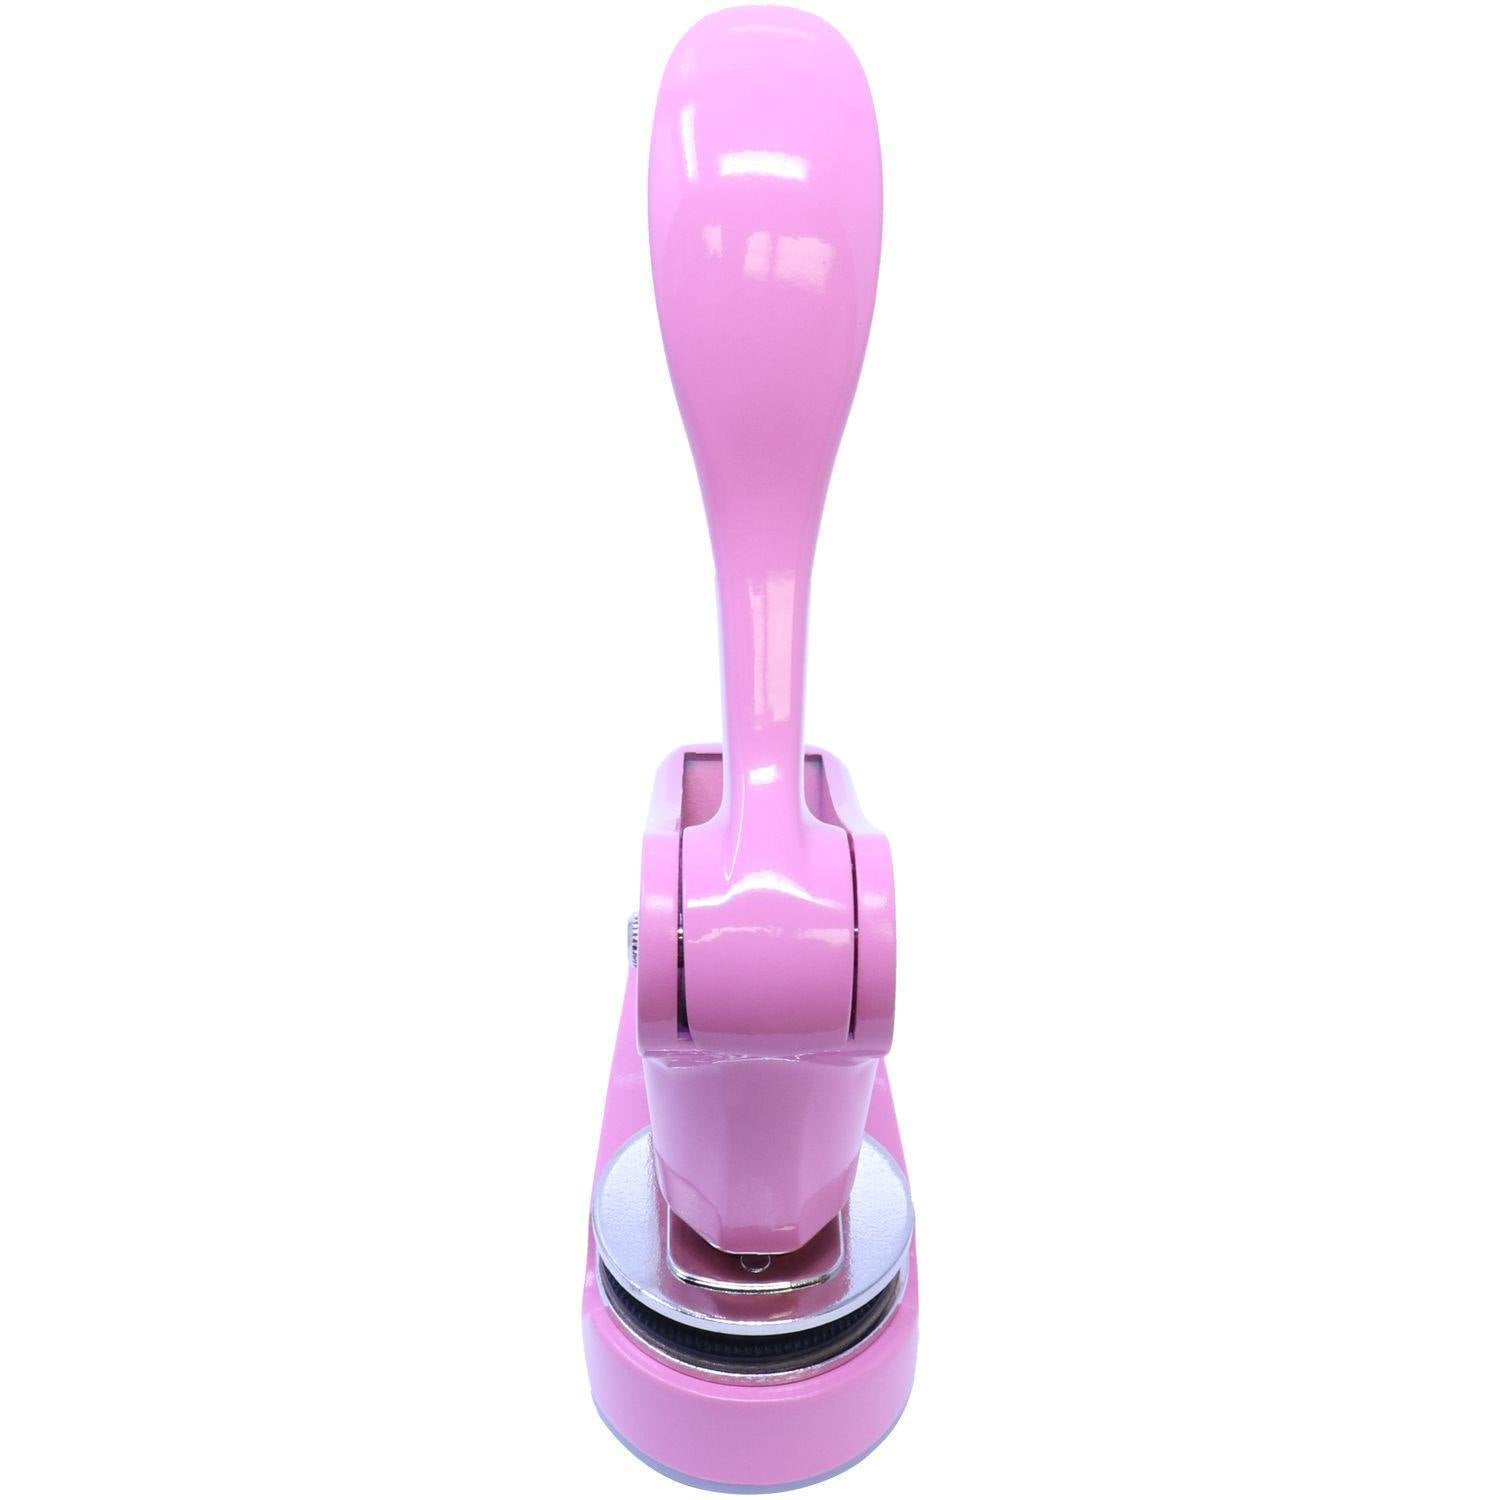 Forester Pink Gift Embosser - Engineer Seal Stamps - Embosser Type_Desk, Embosser Type_Gift, Type of Use_Professional, Use_Heavy Duty